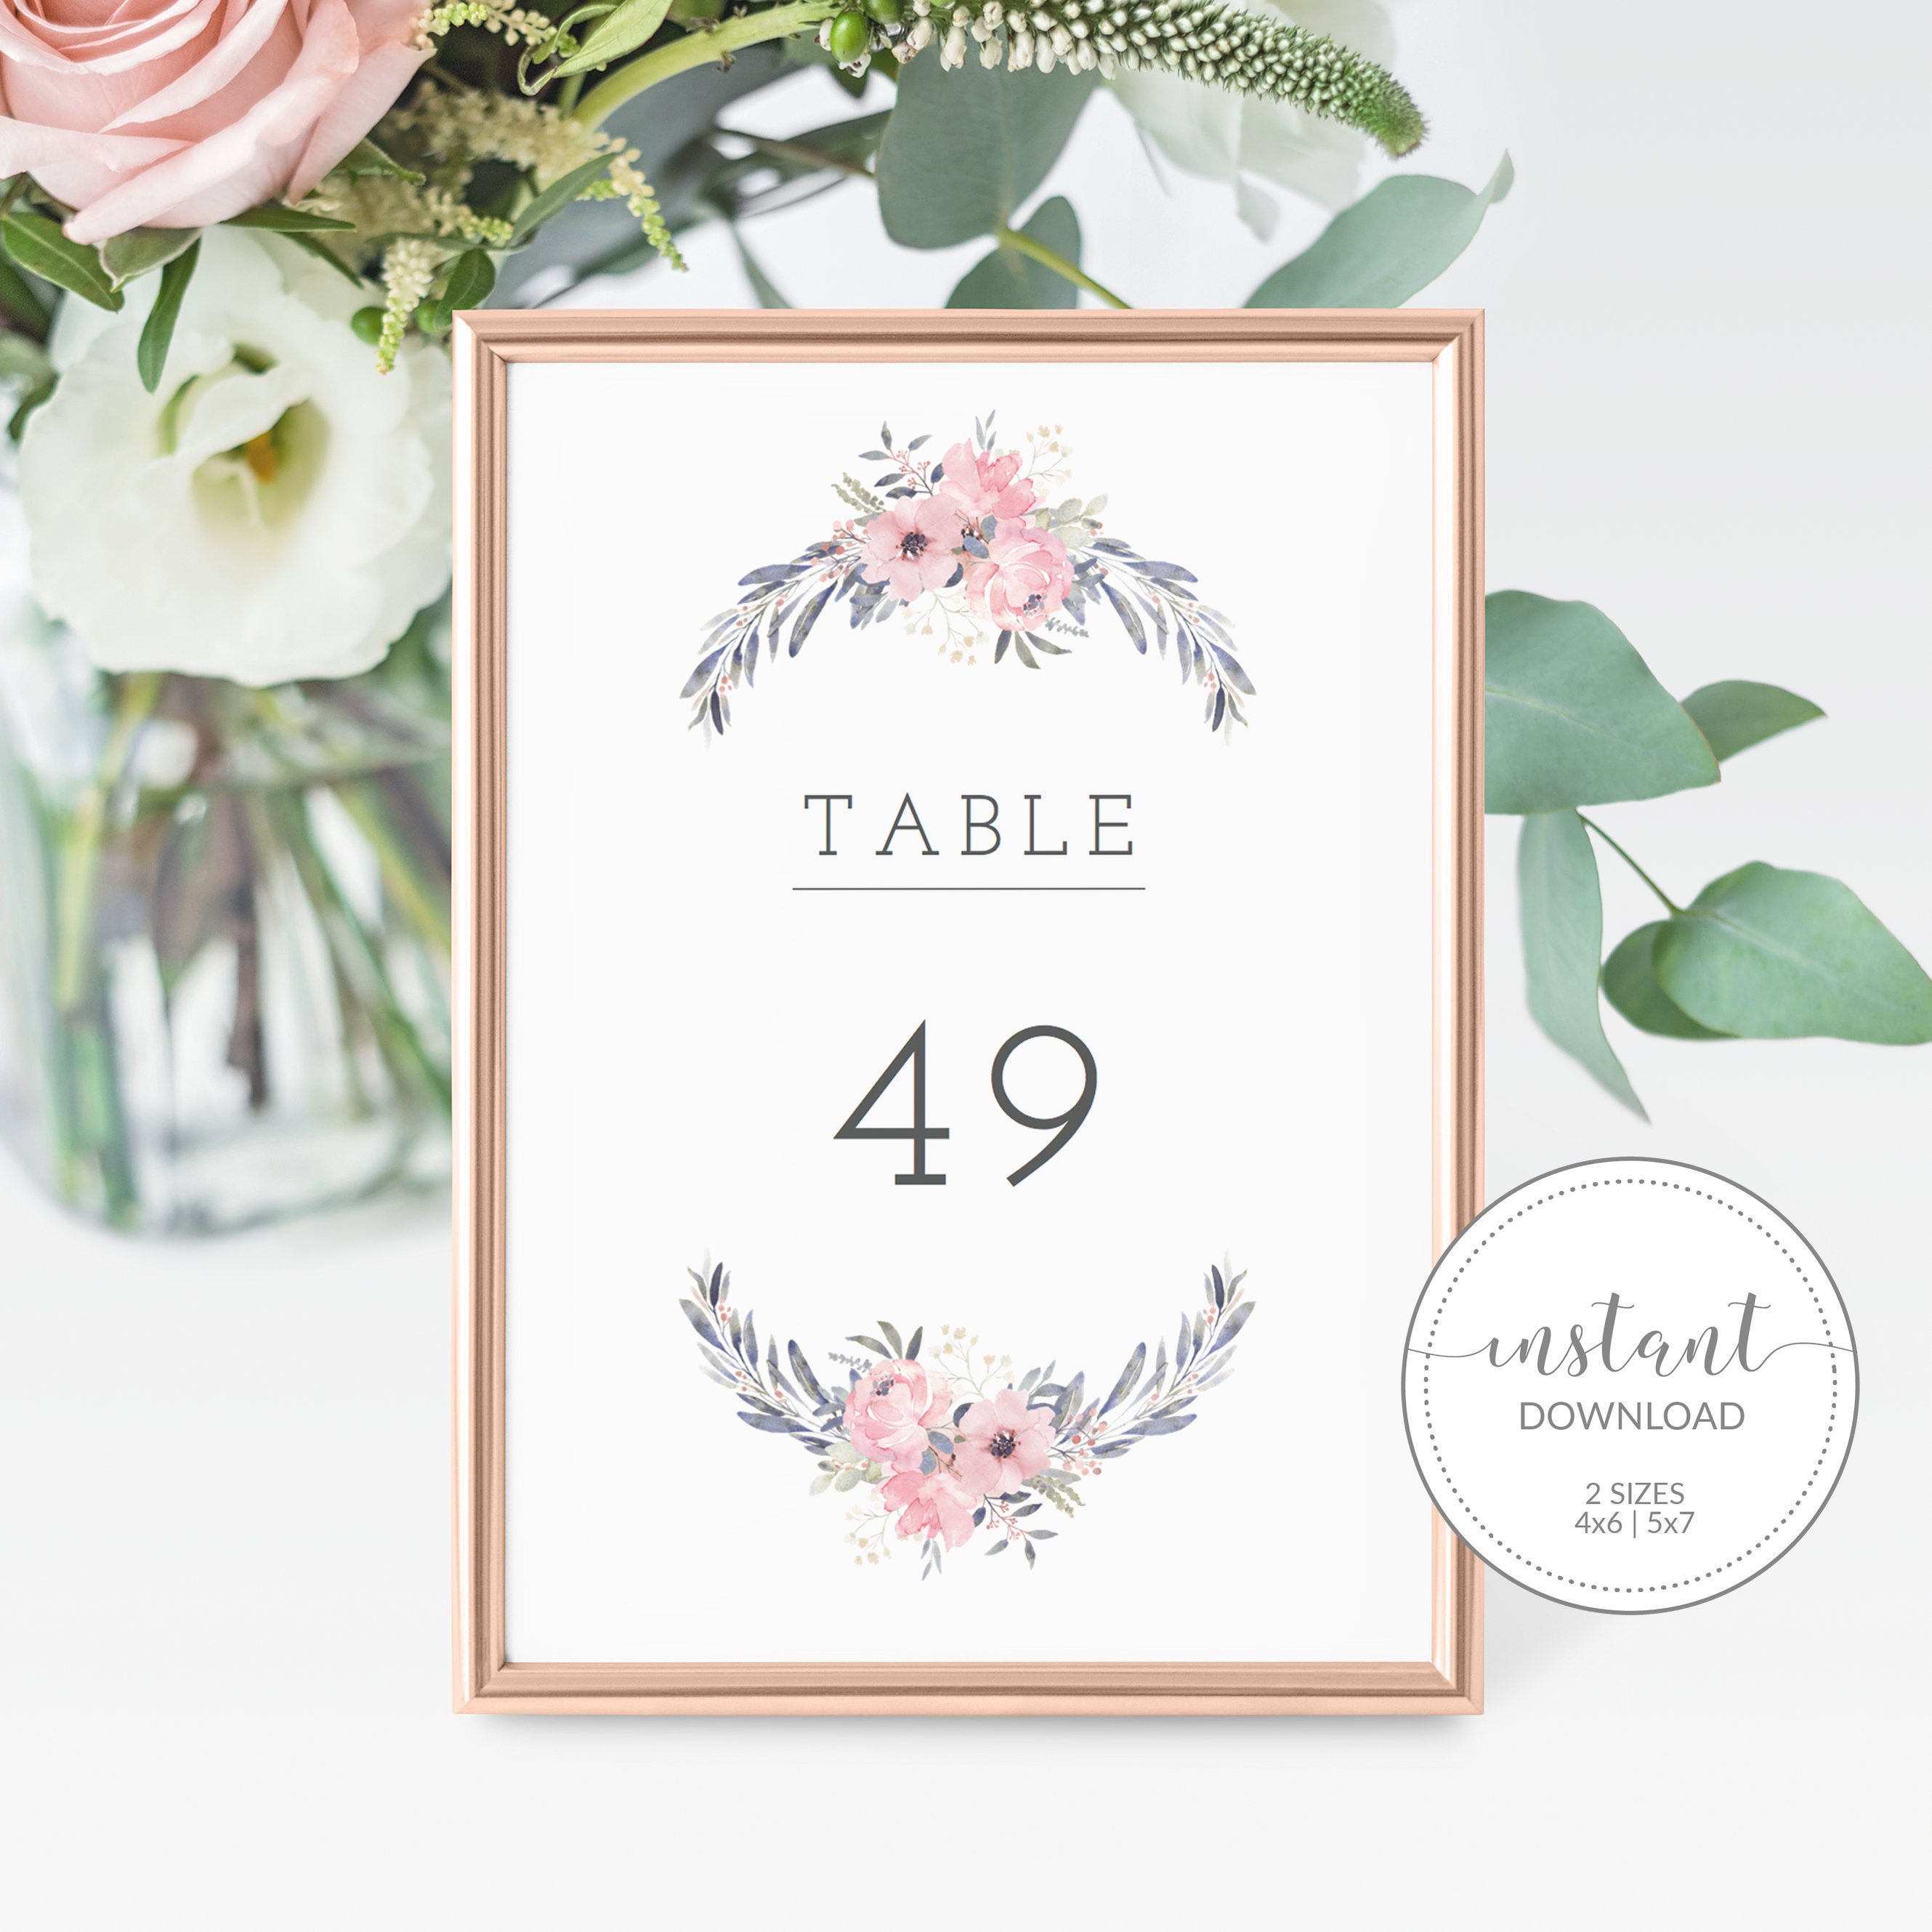 Navy and Blush Floral Wedding Table Numbers 1-50, Table Number Cards Wedding, Table Numbers 4x6 and 5x7, Printable INSTANT DOWNLOAD - NB100 - @PlumPolkaDot 